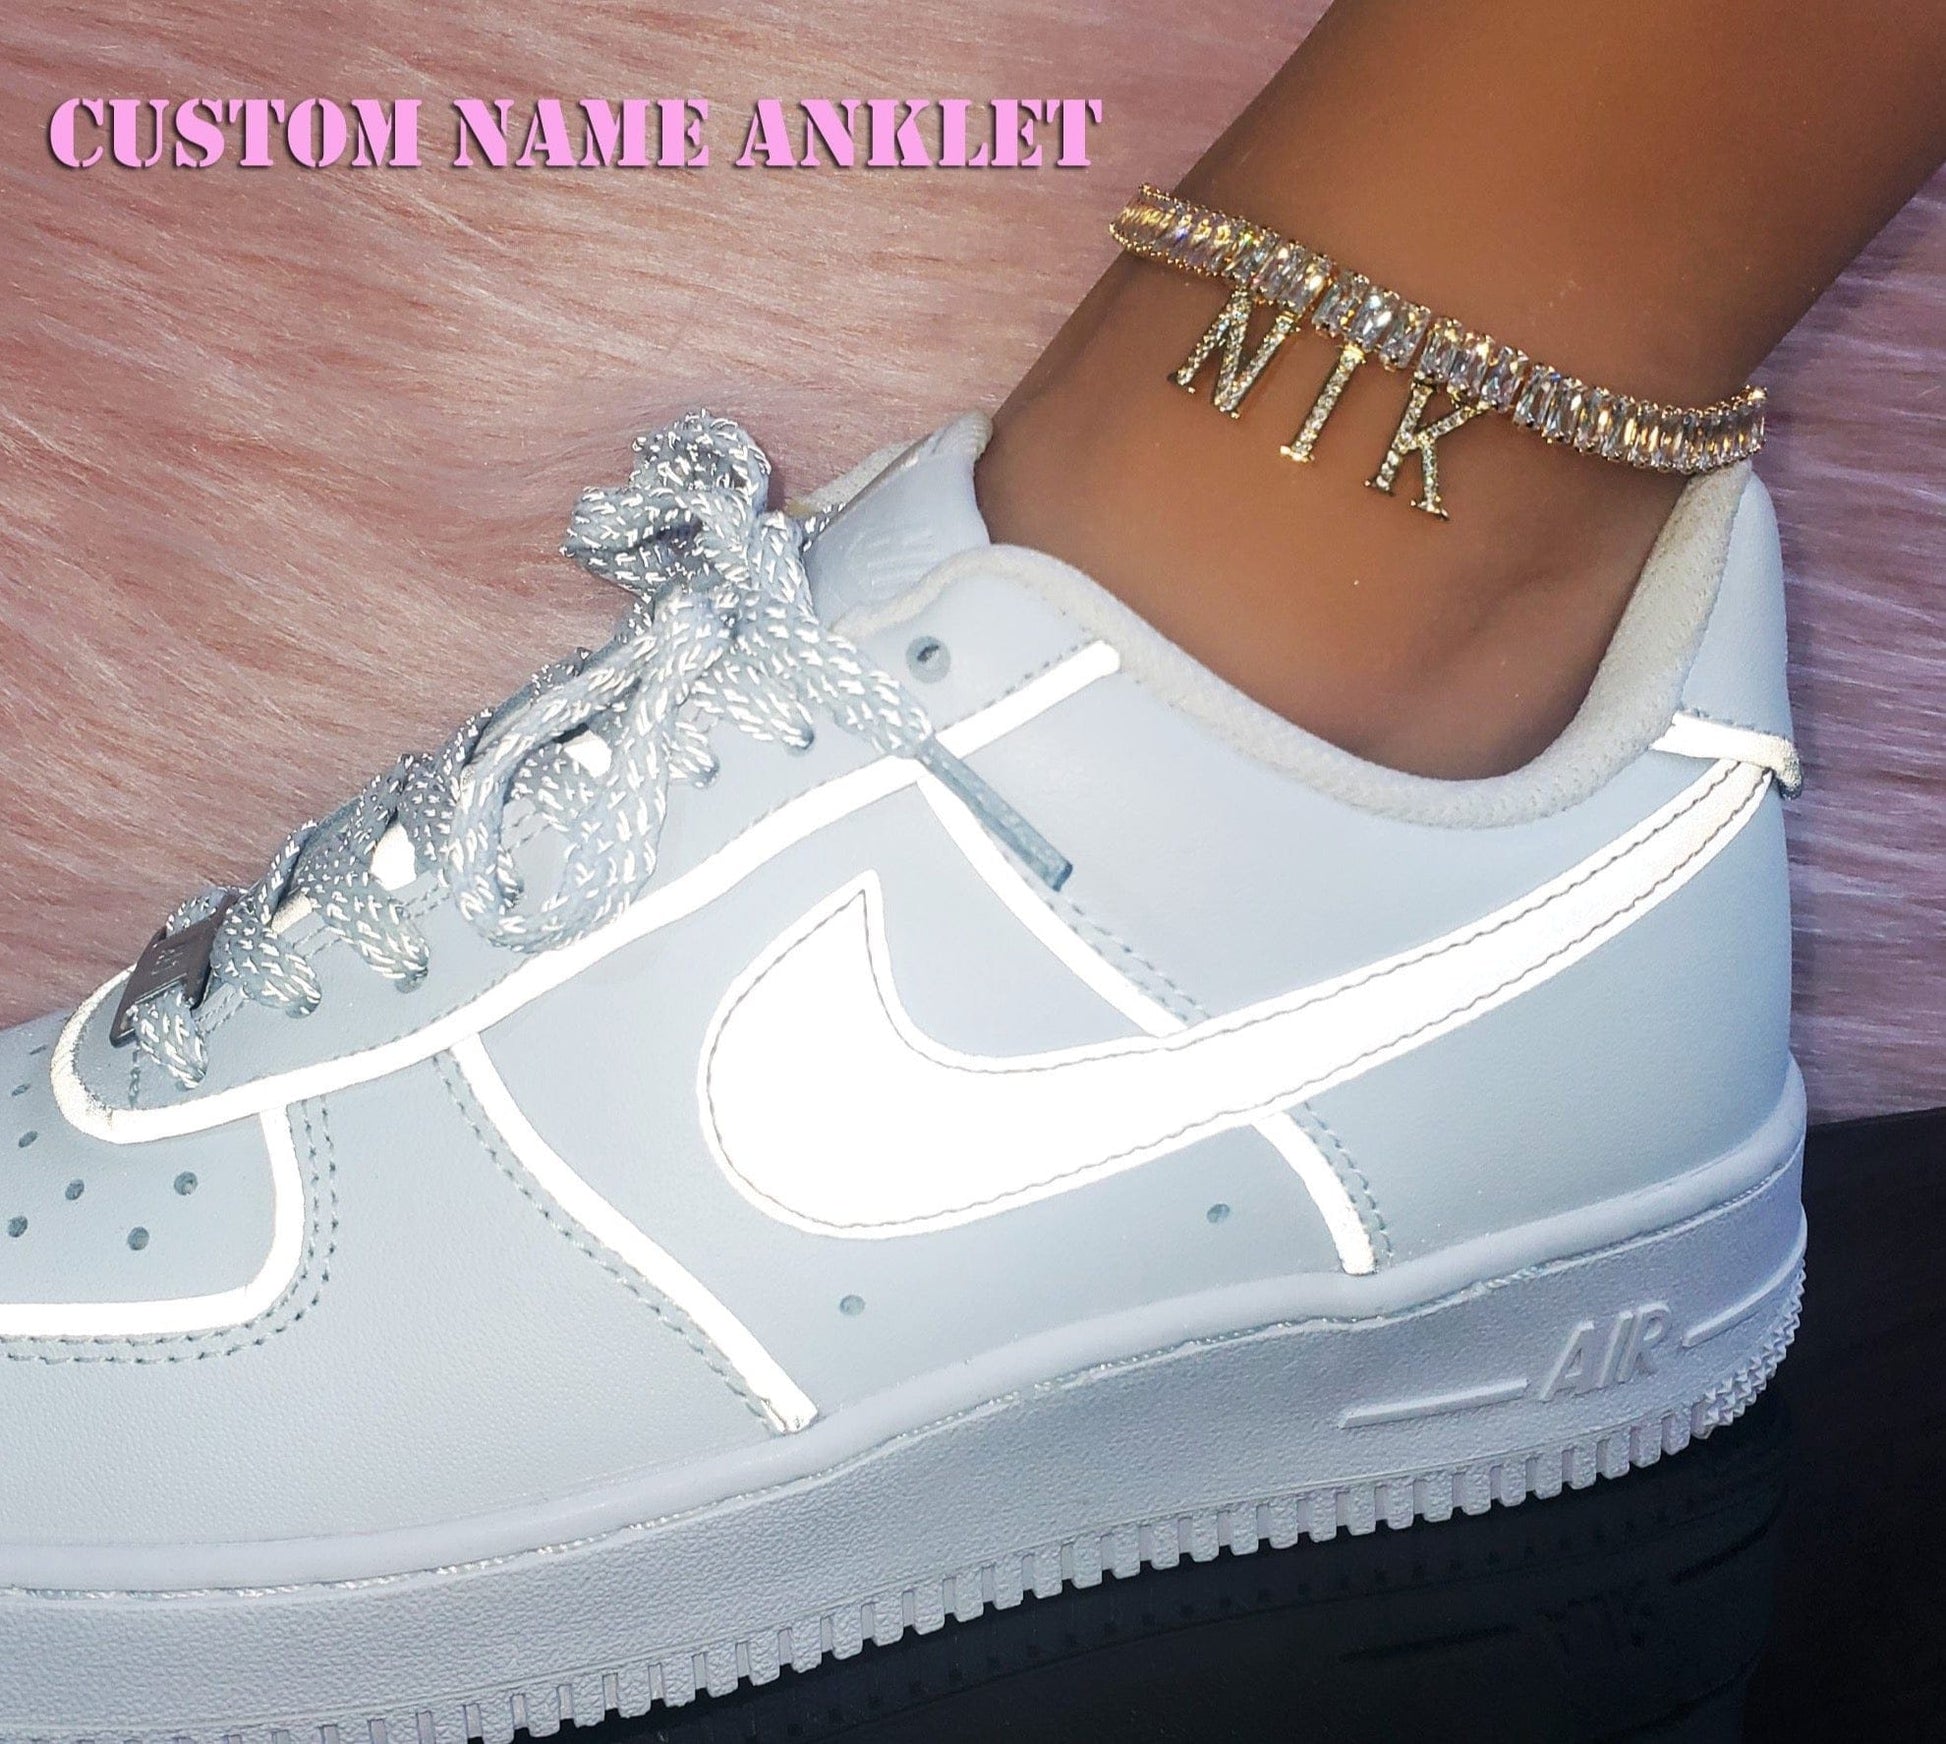 'Shining' Custom Icy Anklet GOLD 4 Letters Anklets by Bling Addict | BlingxAddict